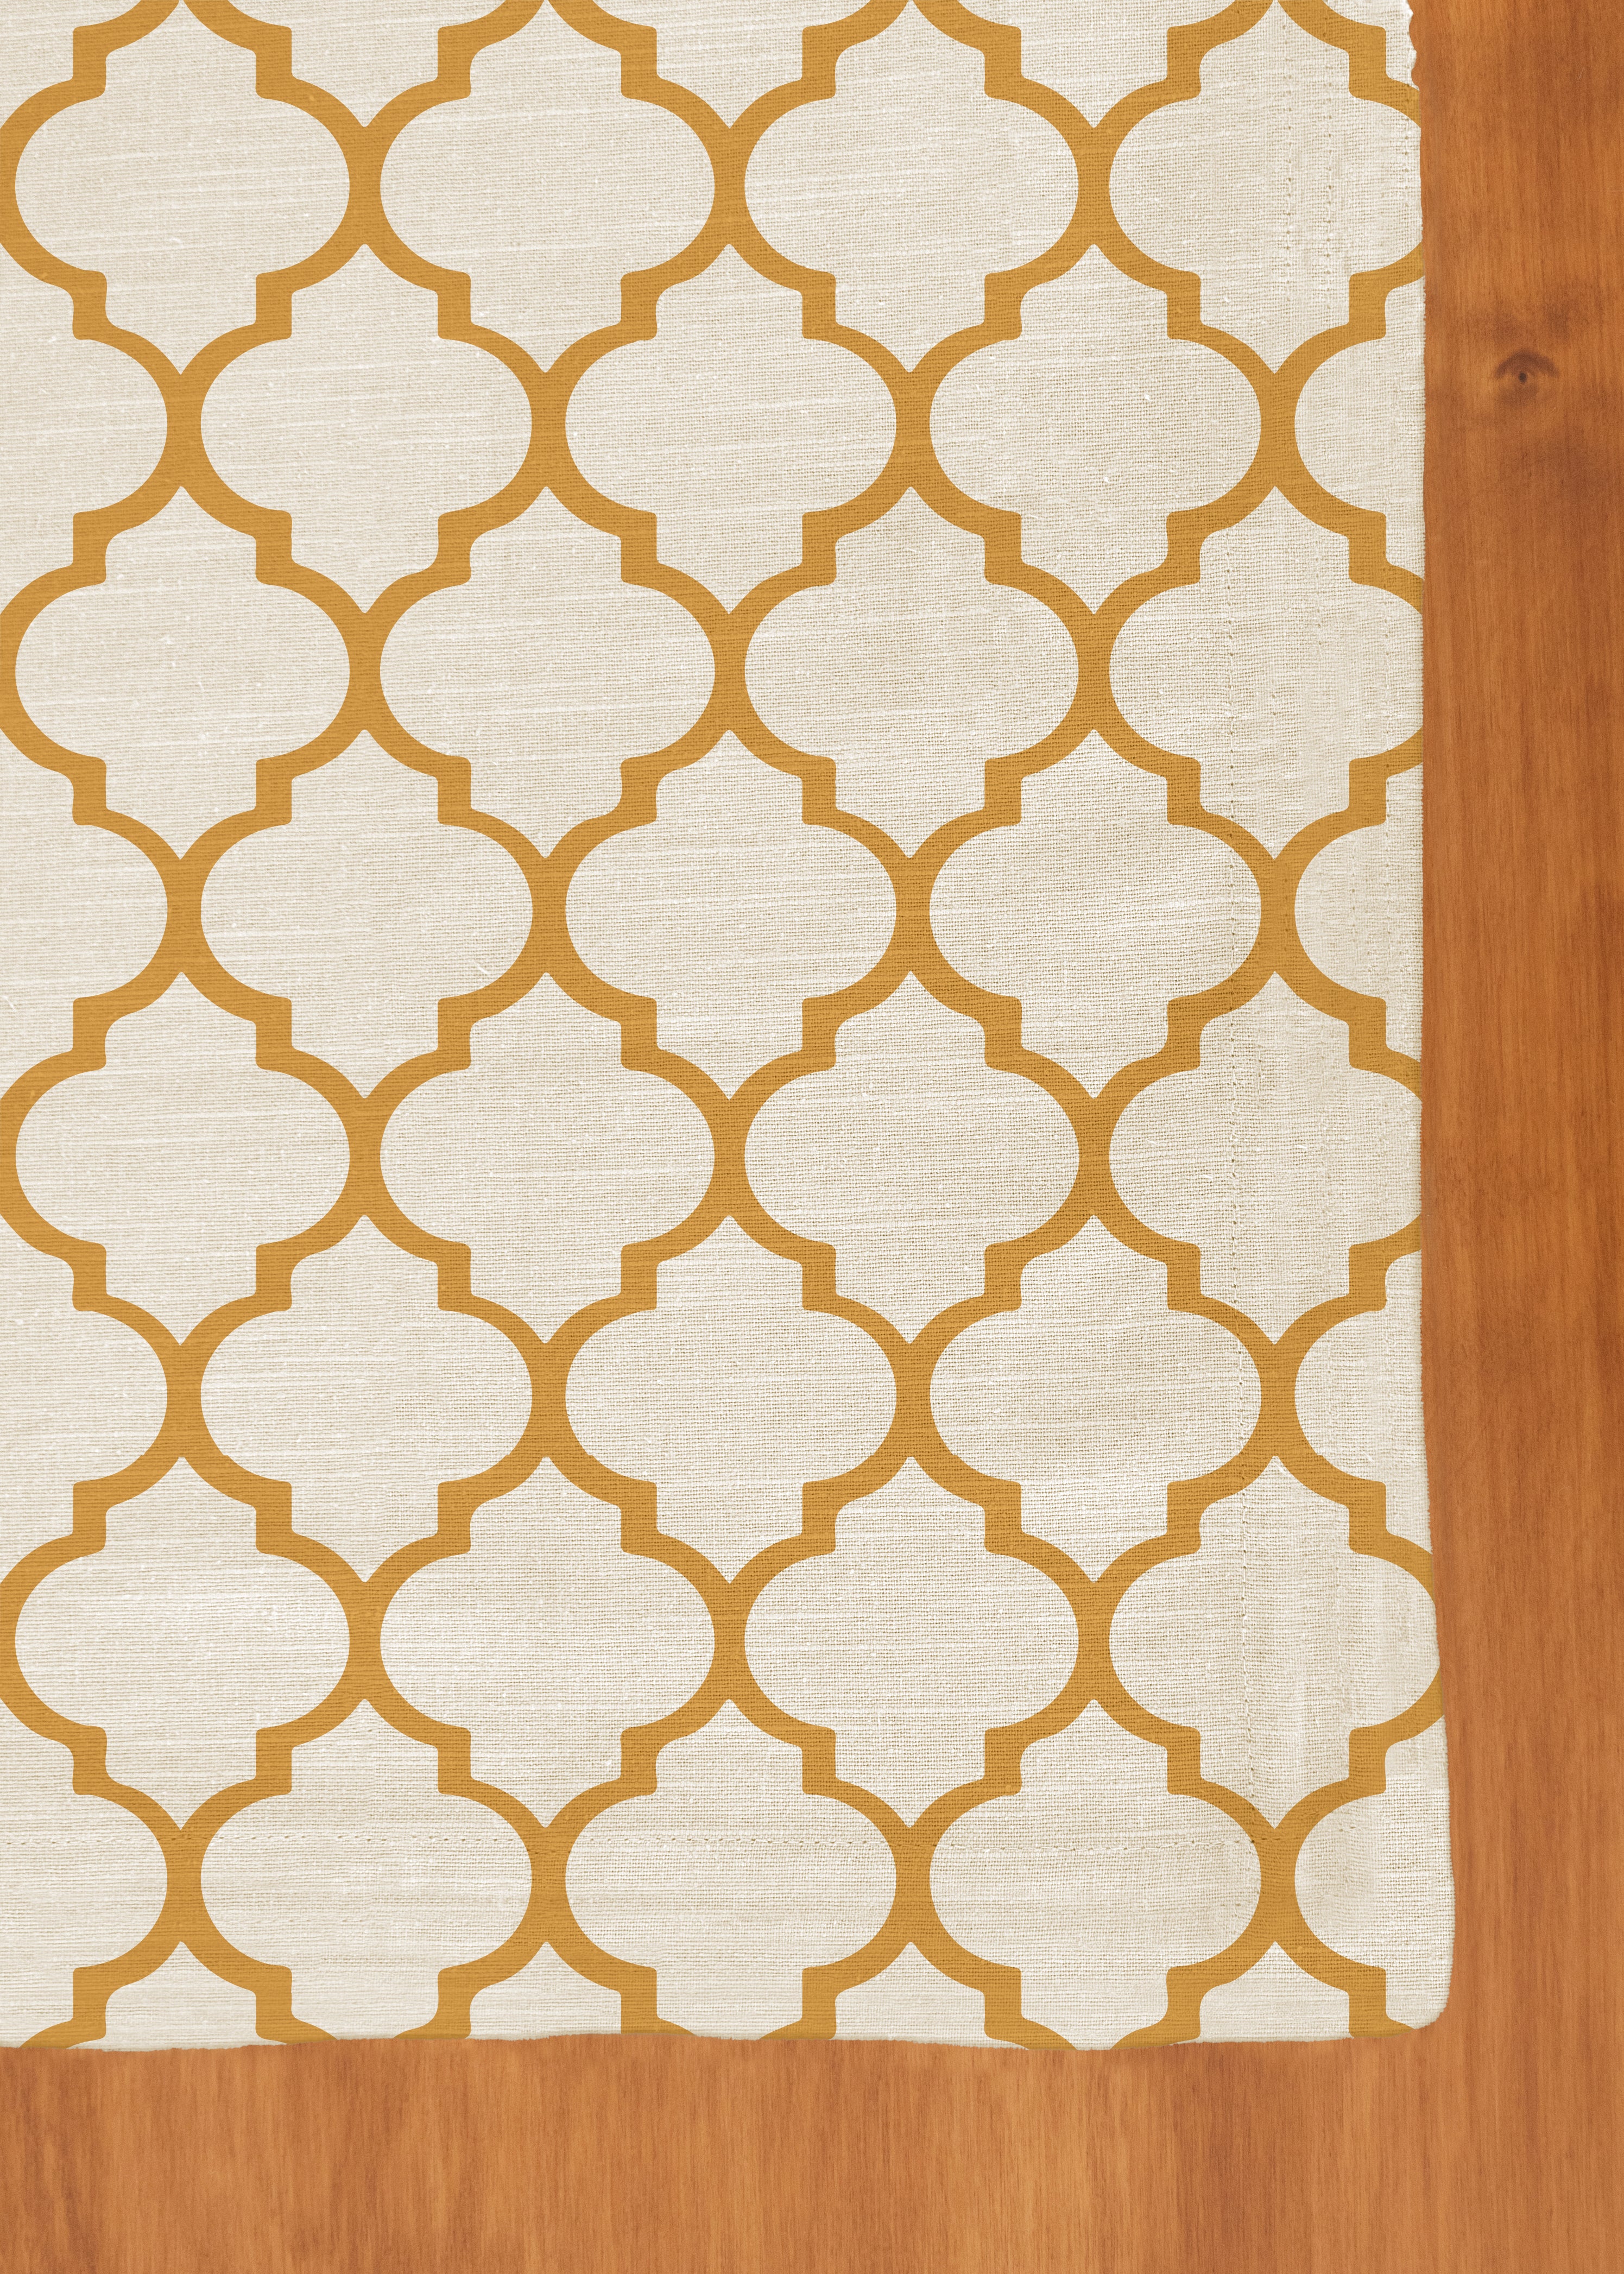 Trellis Printed 100% cotton geometric table cloth for 4 seater or 6 seater dining - Mustard